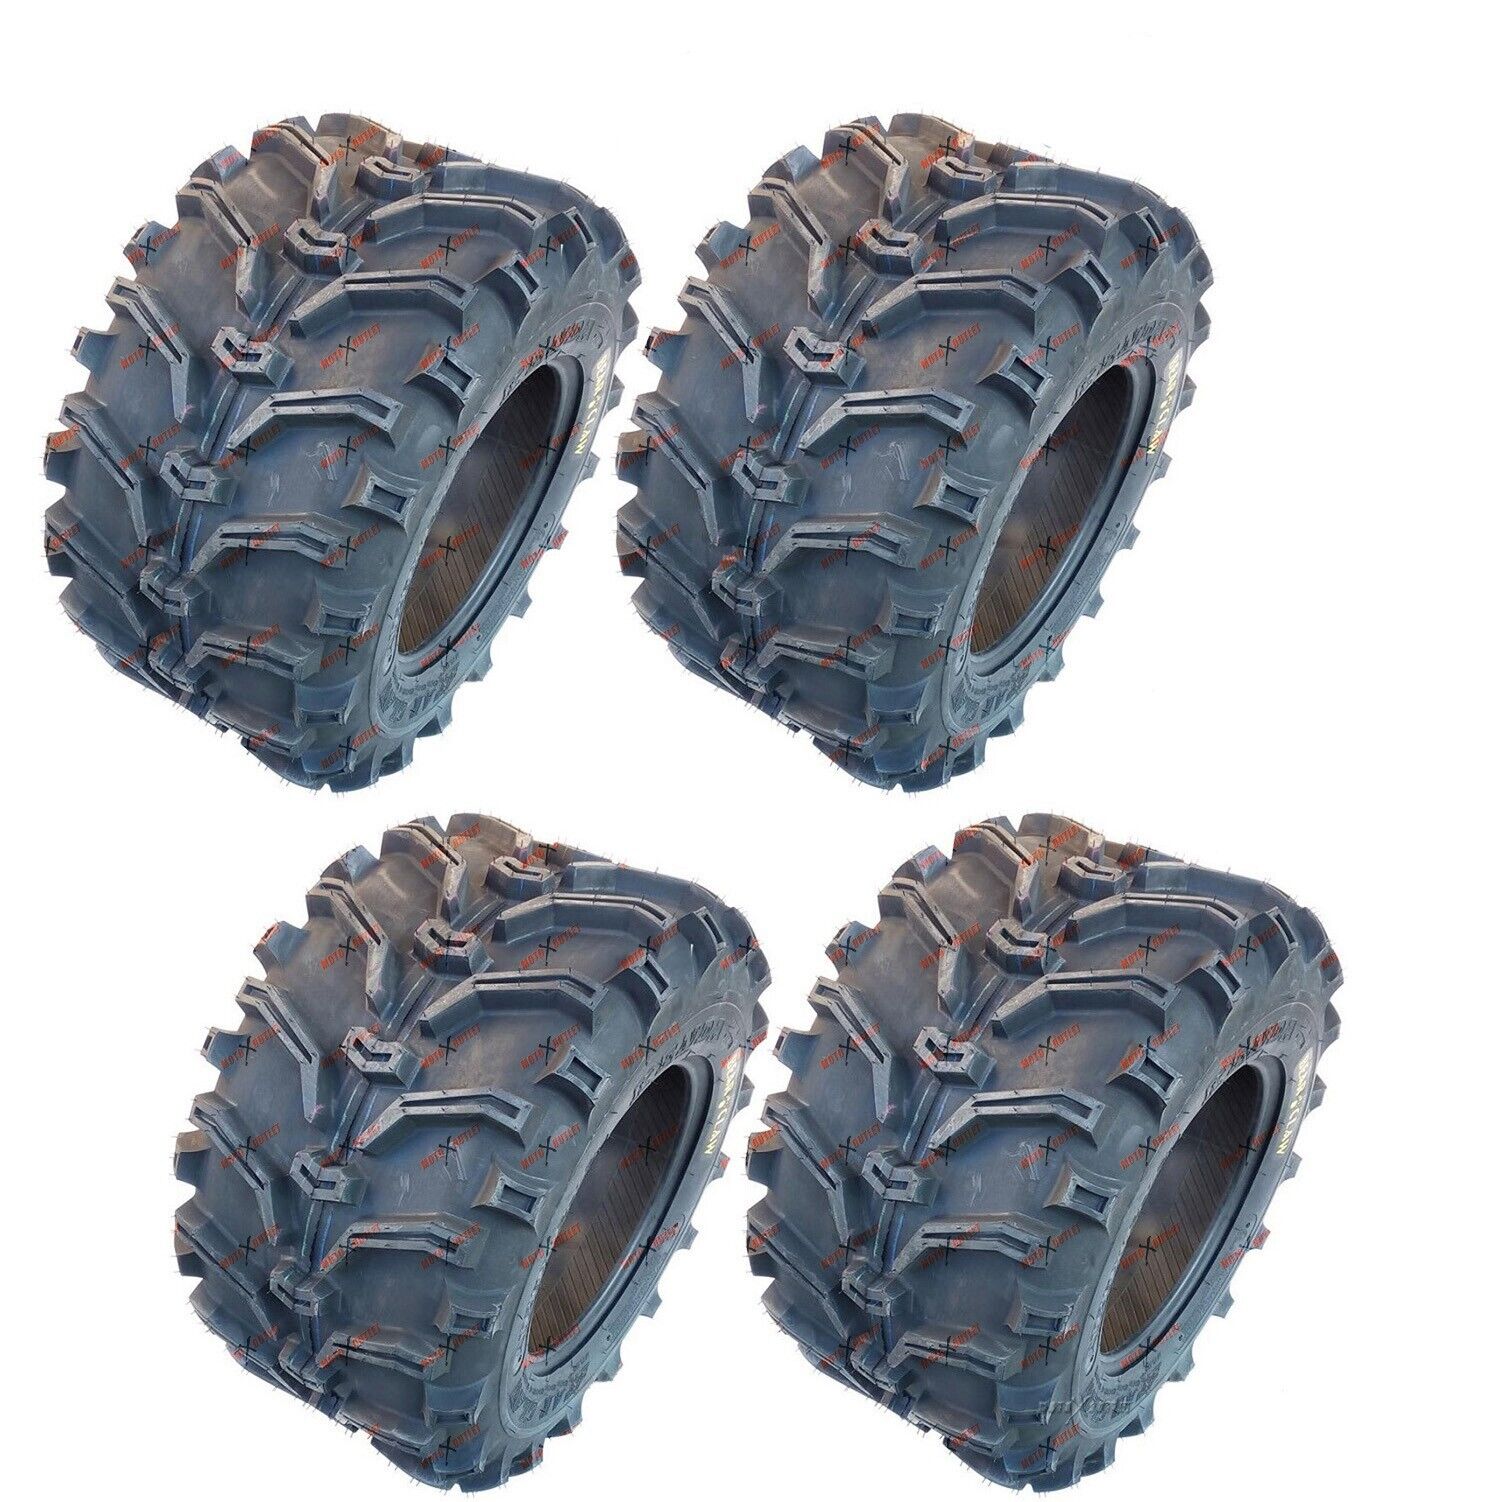 Kenda Bear Claw 25x8-12 25x10-12 Atv Tires Set of 4 25x8x12 25x10x12 6 Ply Rated